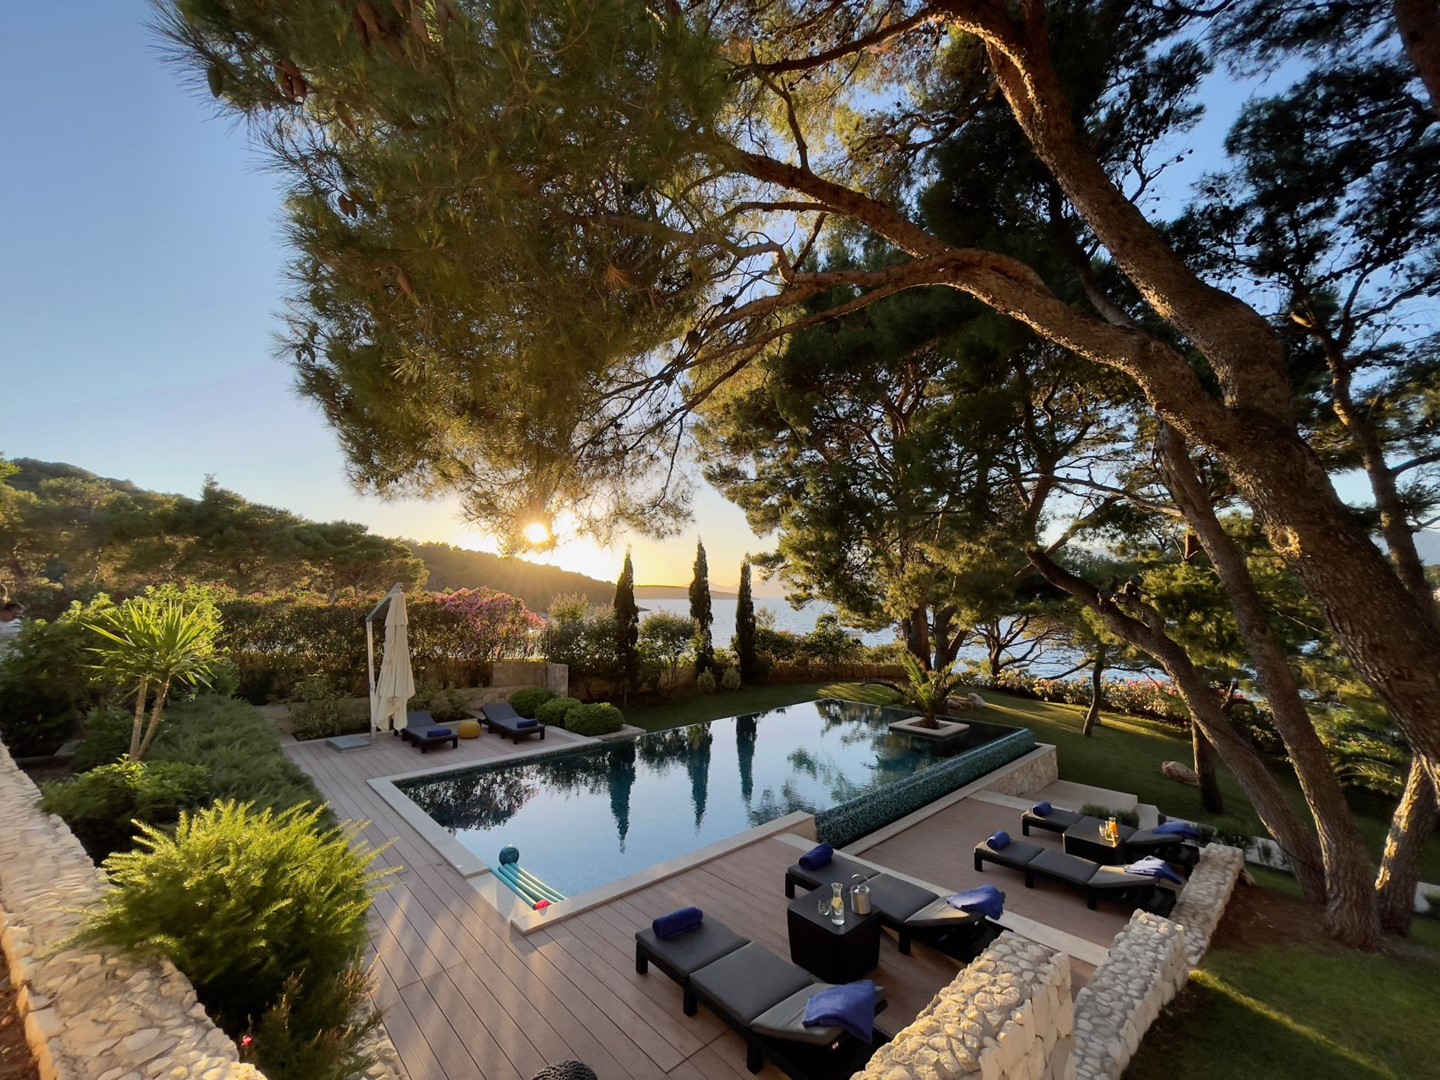 Private heated pool and deck chairs under the trees in a landscaped garden of a Croatia luxury villa Lilly on Brac island